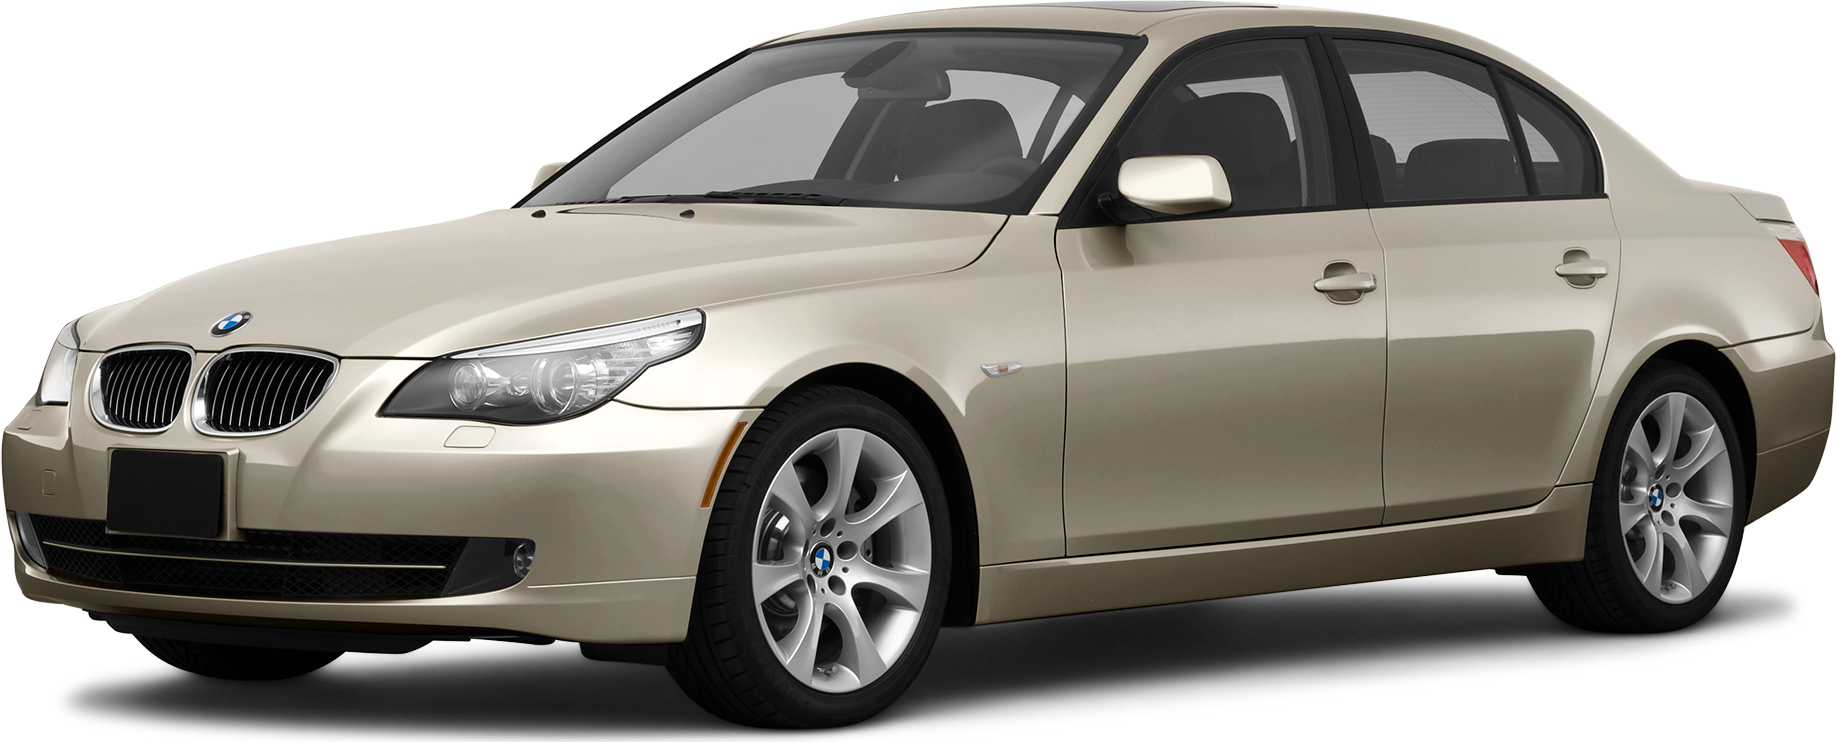 10 Bmw 5 Series Values Cars For Sale Kelley Blue Book